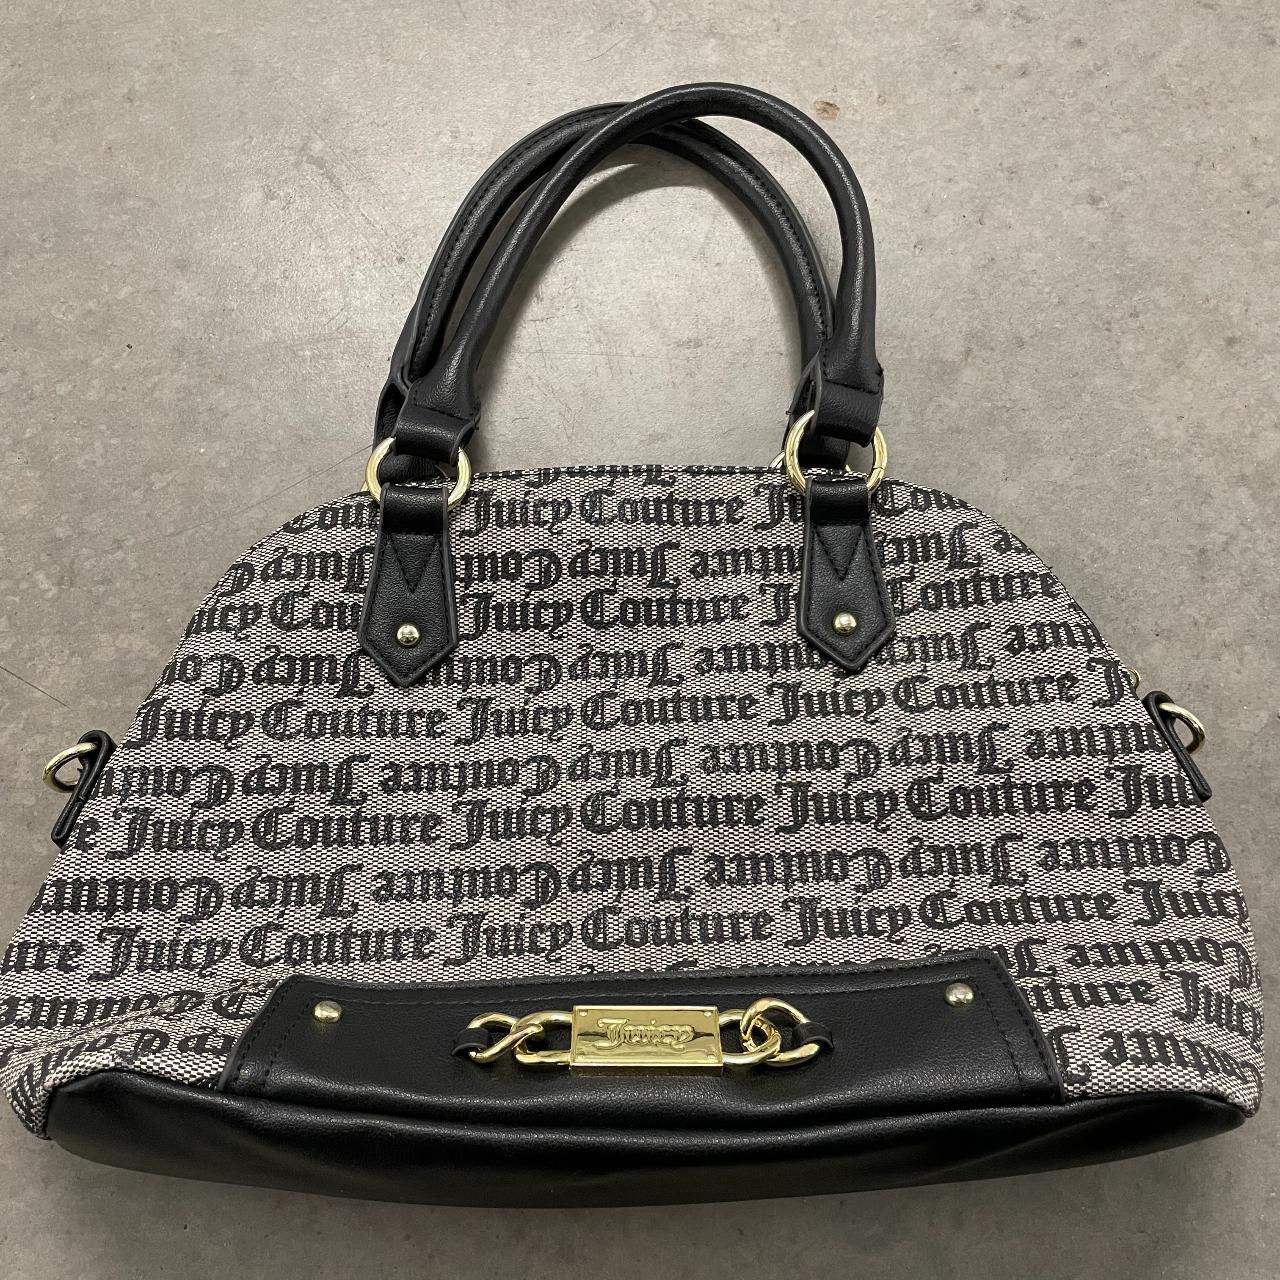 Stylish NWT Juicy Couture Shoulder Purse